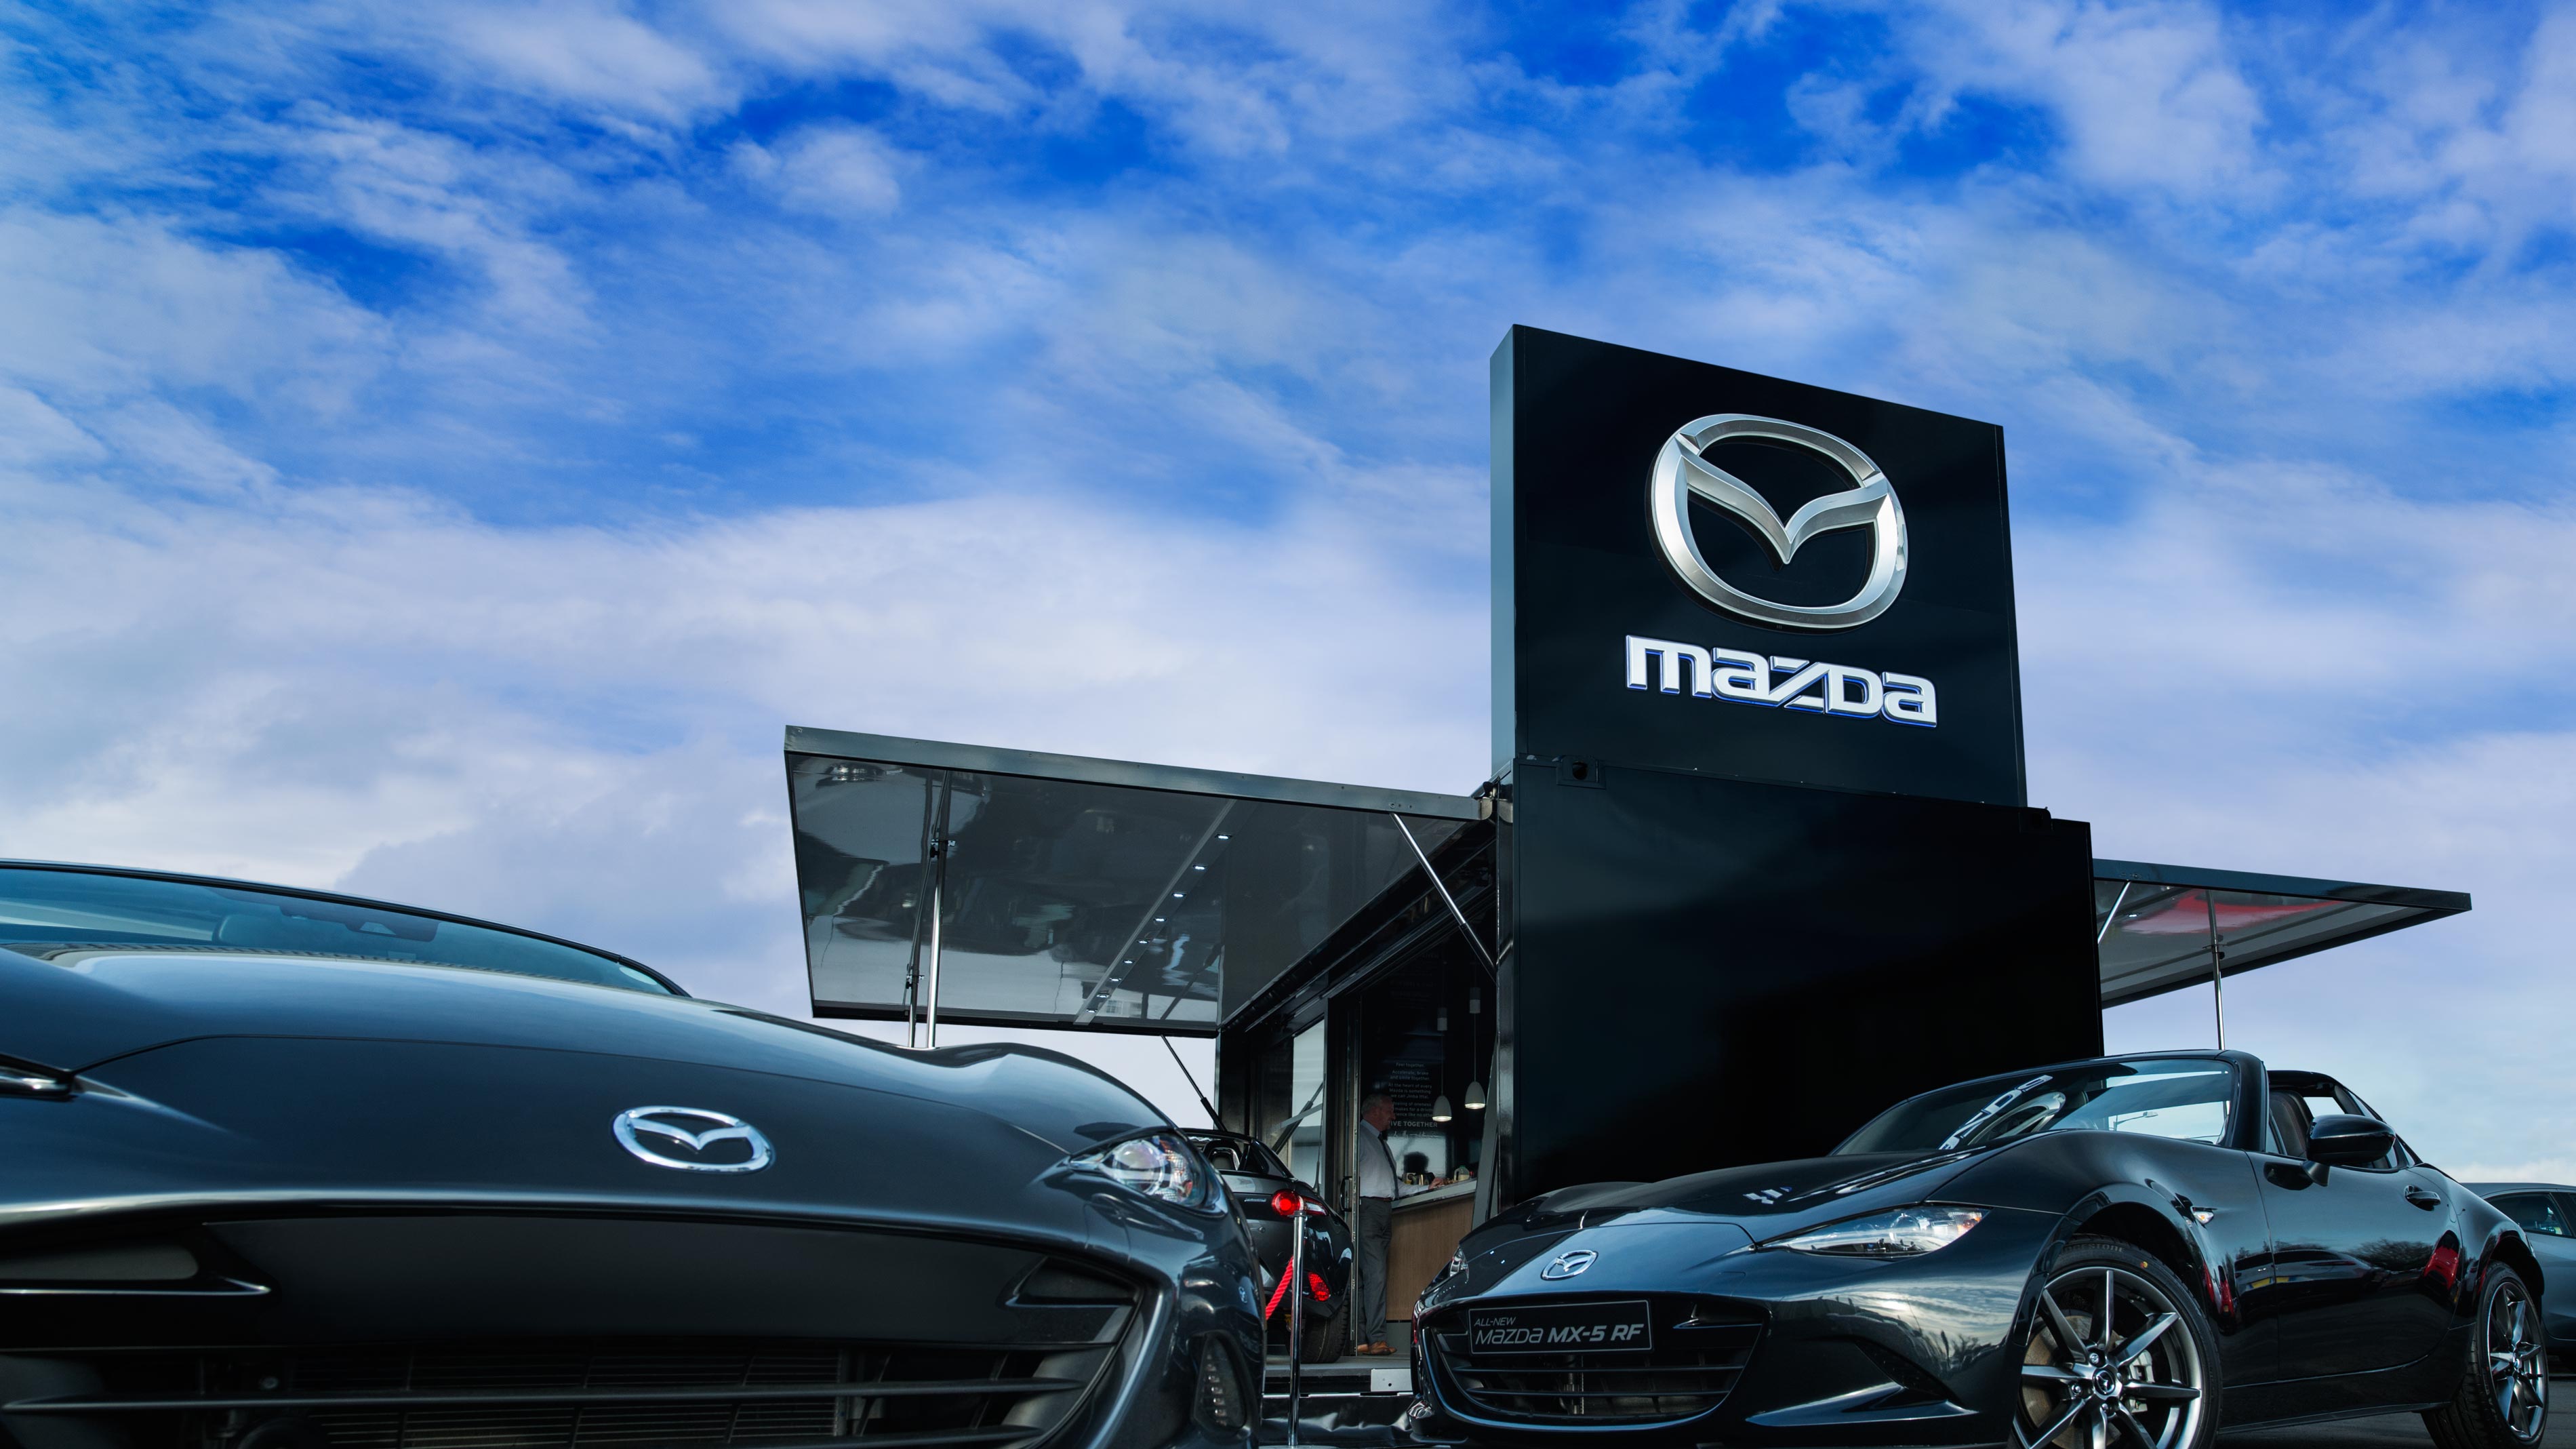 Brand experience agency celebrates the joy of driving with Mazda